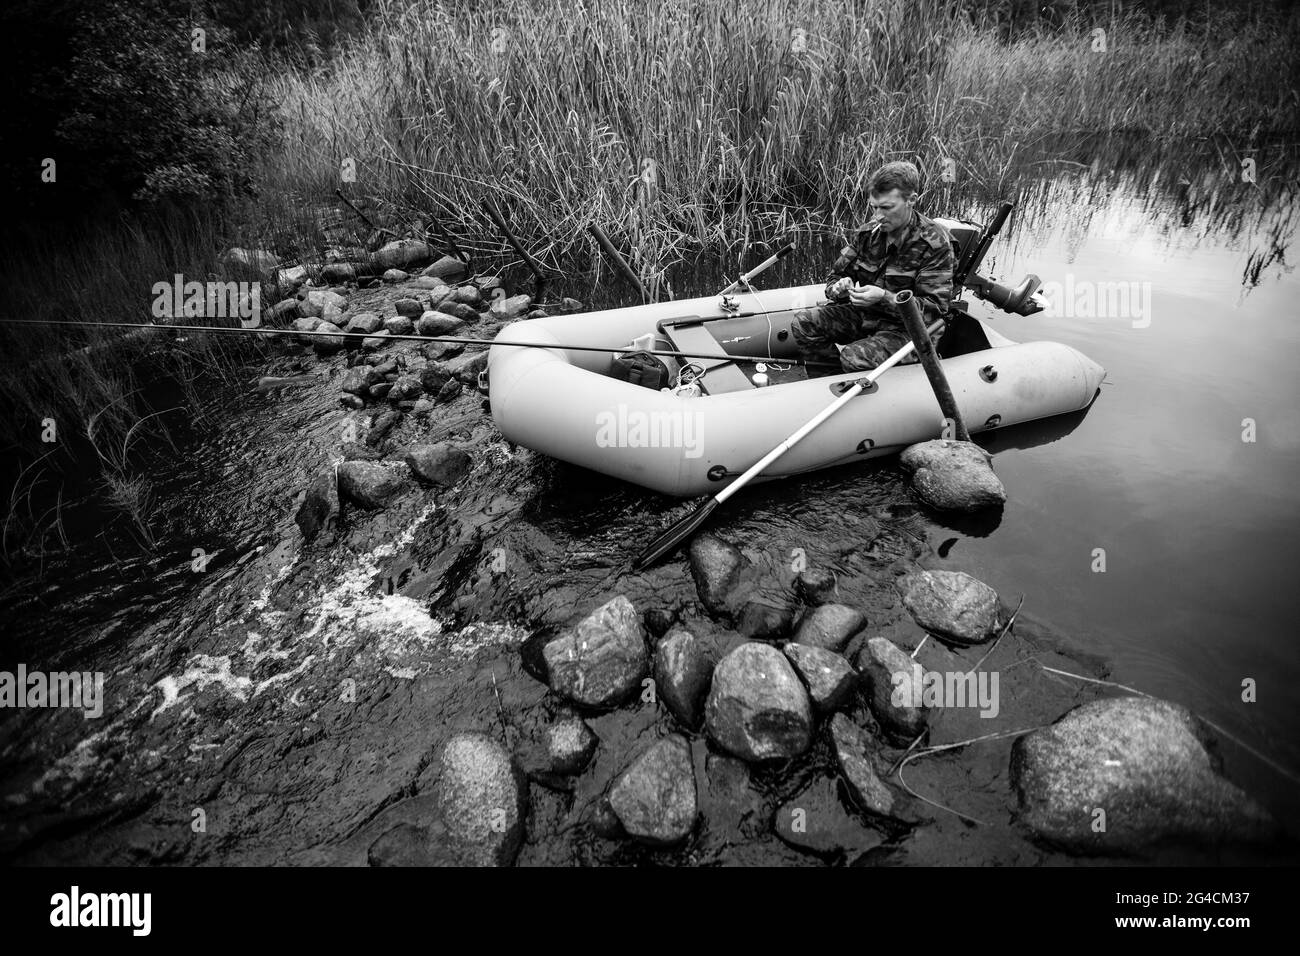 Fisherman dressed in camouflage fishing in the river with a rubber boat. Black and white photo. Stock Photo